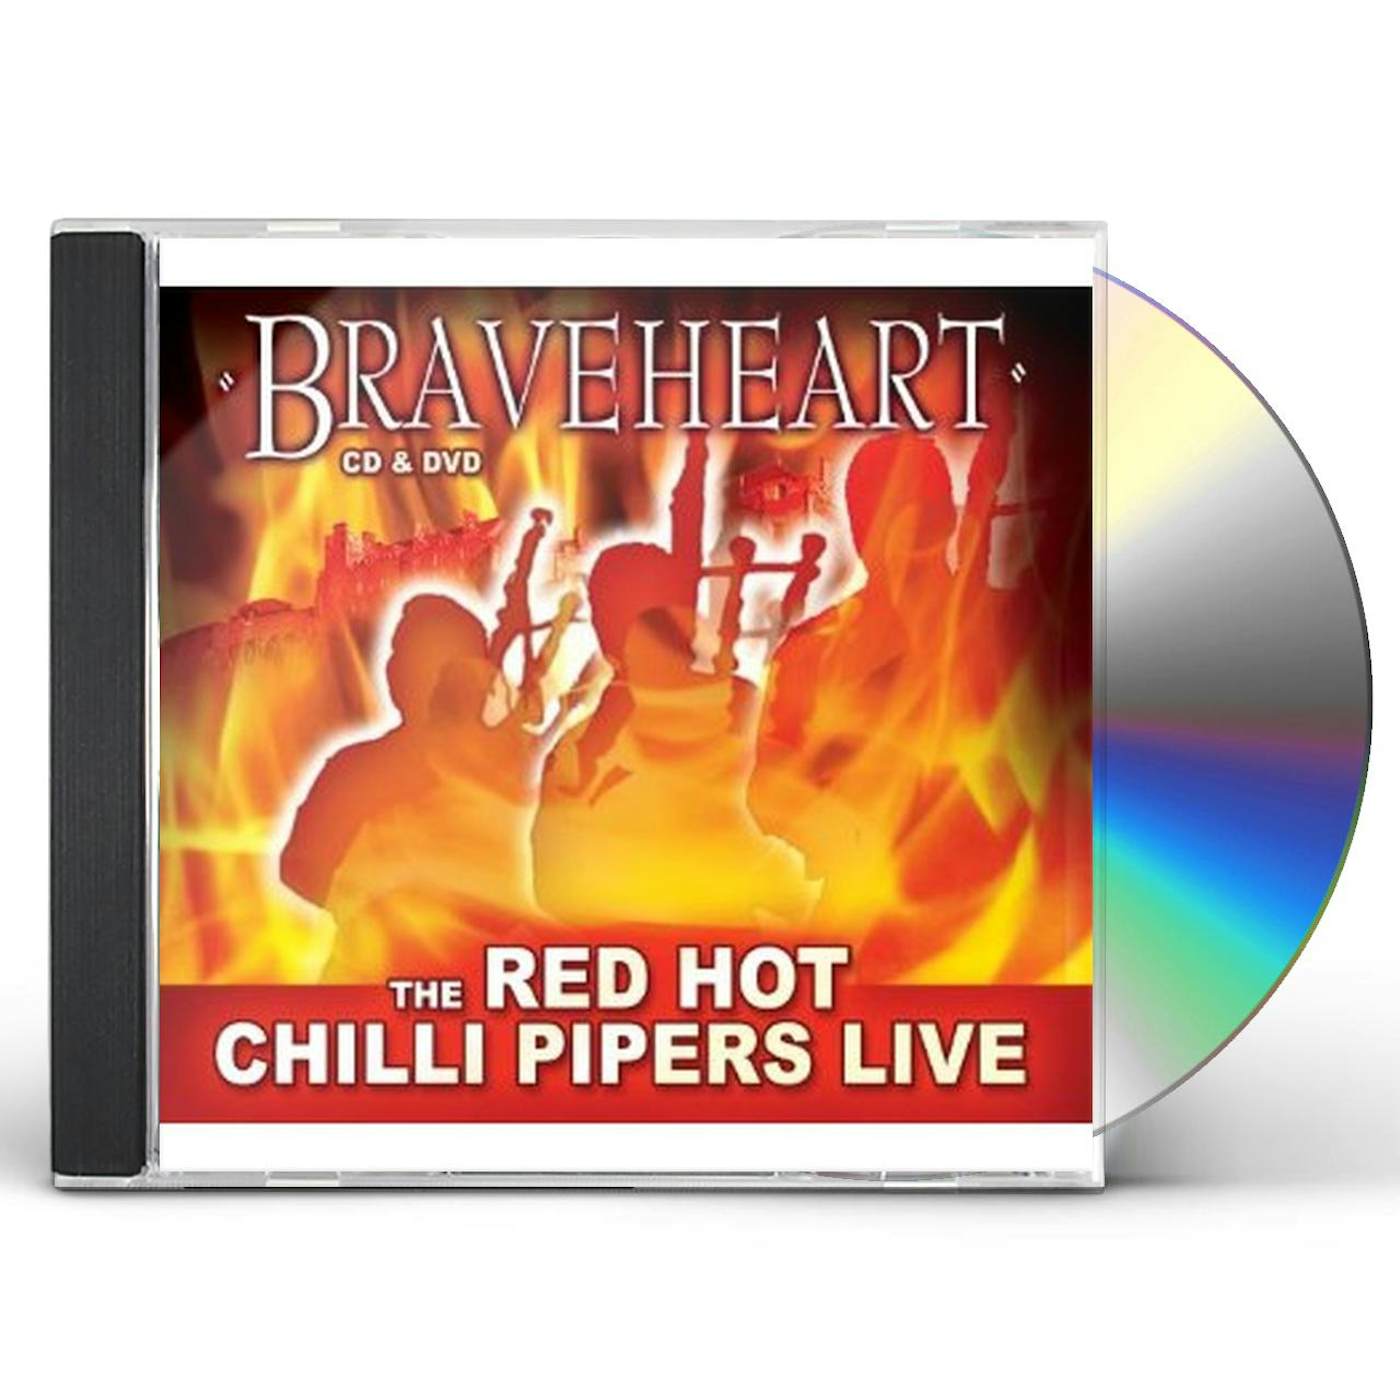 Red Hot Chilli Pipers BRAVEHEART CD